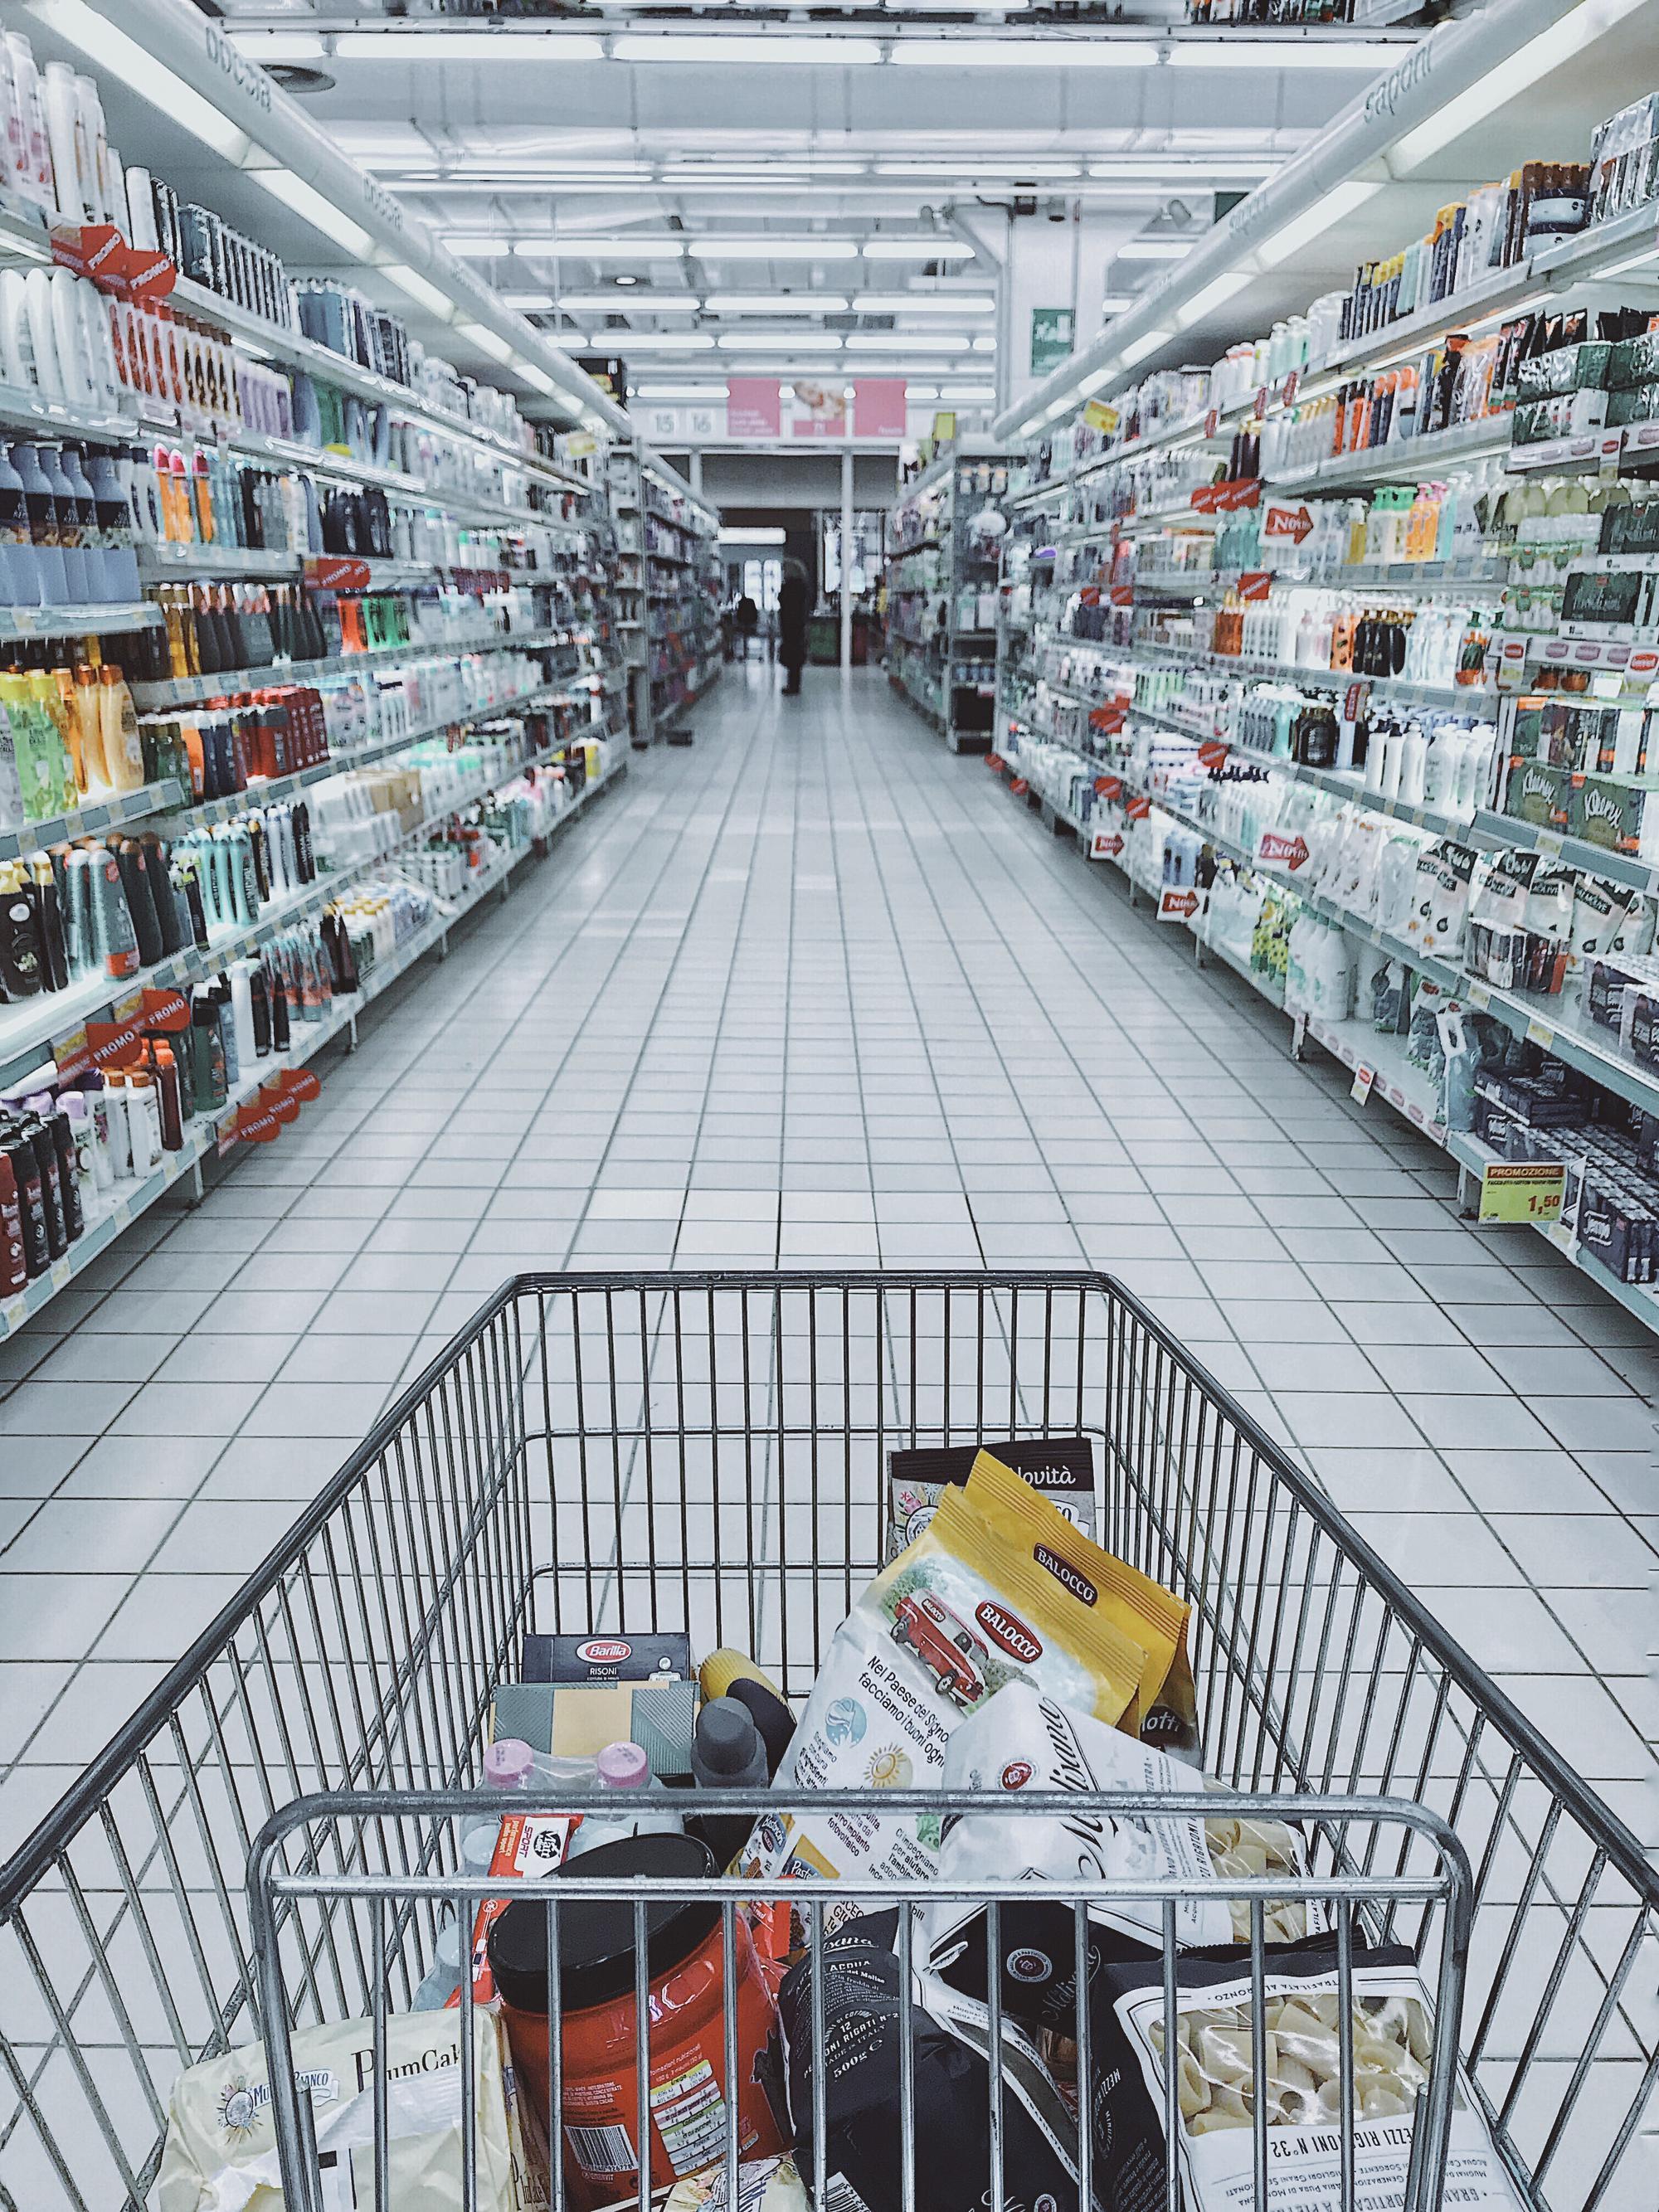 A partially filled shopping cart is depicted in the middle of an aisle between shelves in a store.